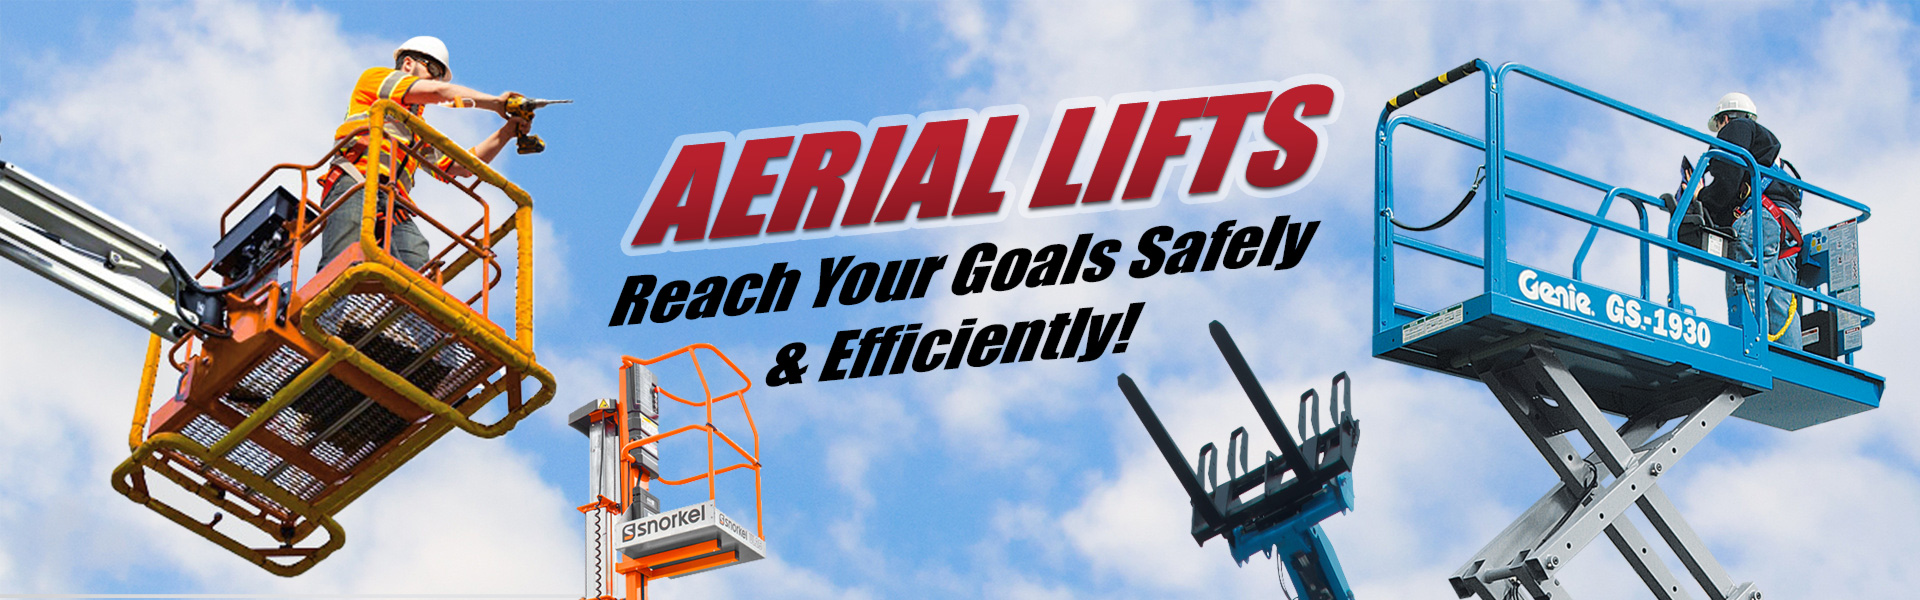 Aerial Lifts - Reach Your Goals Safely and Efficiently.